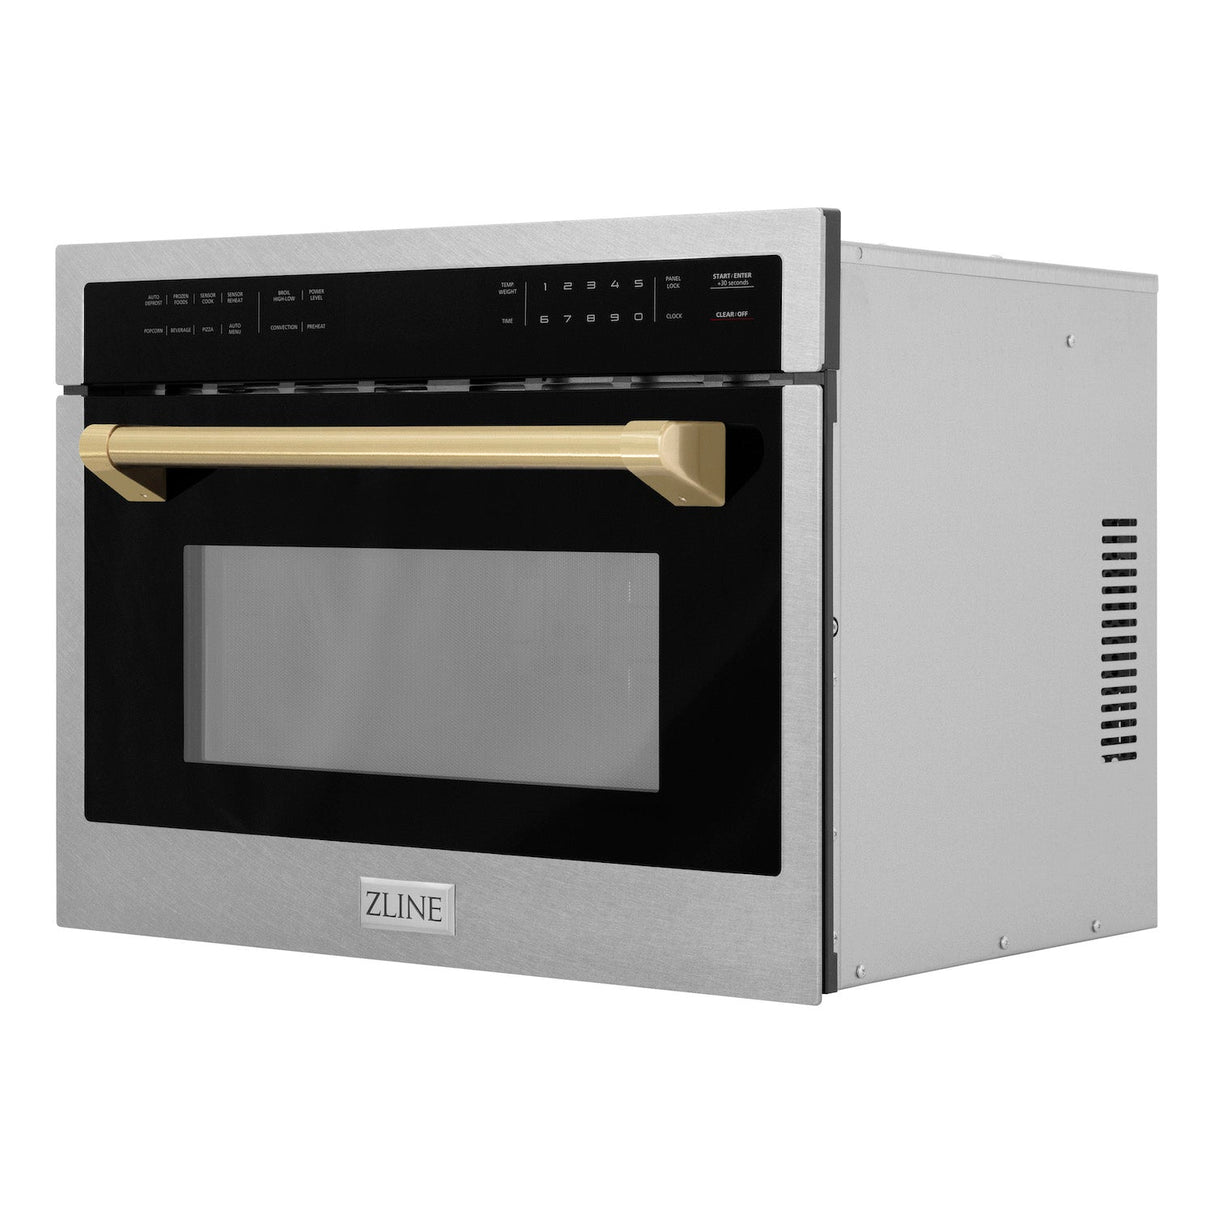 ZLINE Autograph Edition 24 in. 1.6 cu ft. Built-in Convection Microwave Oven in Fingerprint Resistant Stainless Steel with Champagne Bronze Accents (MWOZ-24-SS-CB)